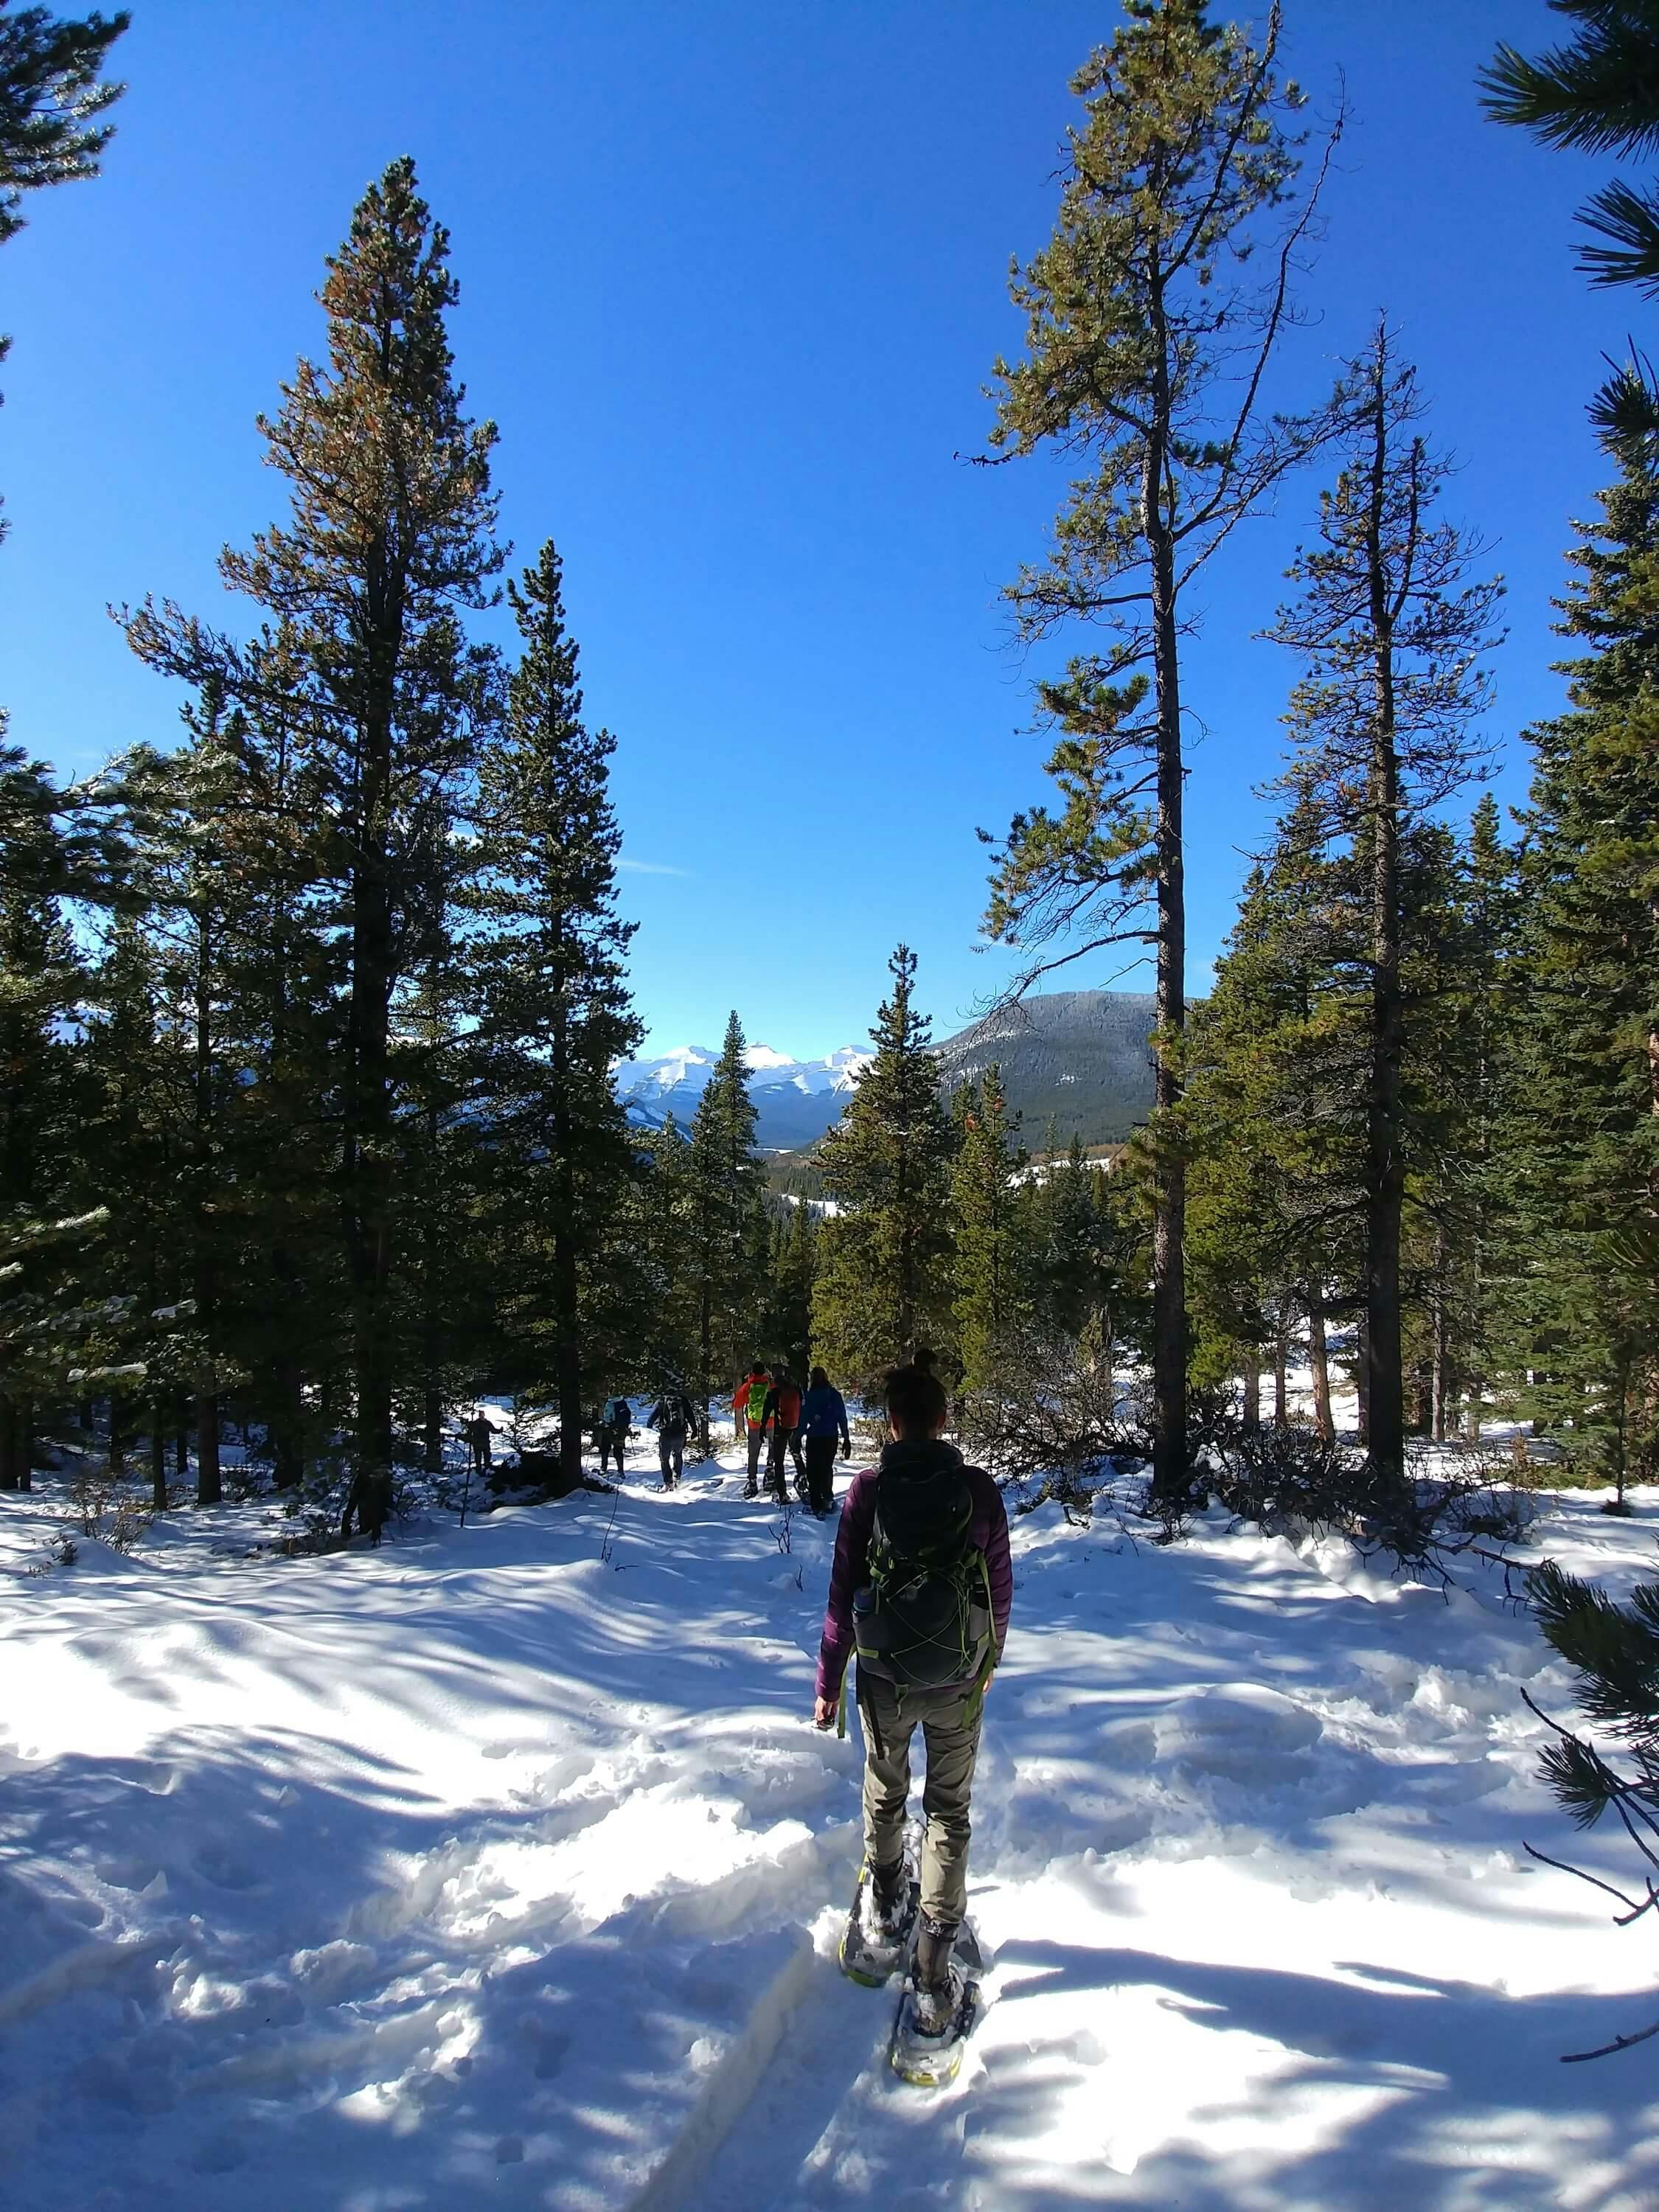 A team of snowshoers walks through a snowy forest.